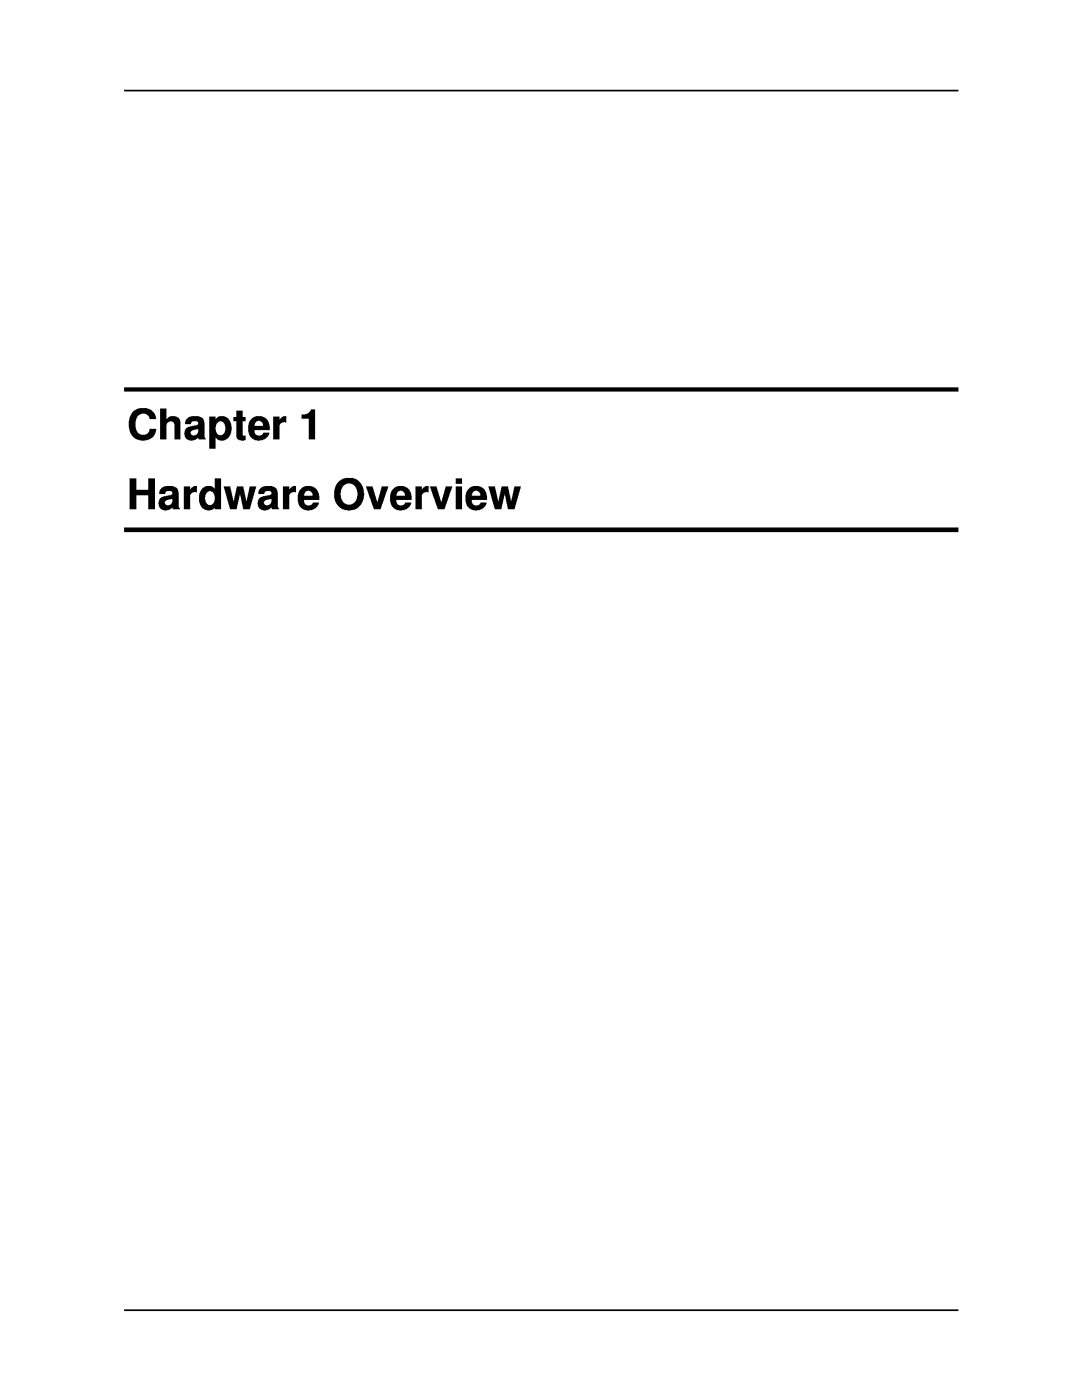 Toshiba S2 manual Chapter Hardware Overview 